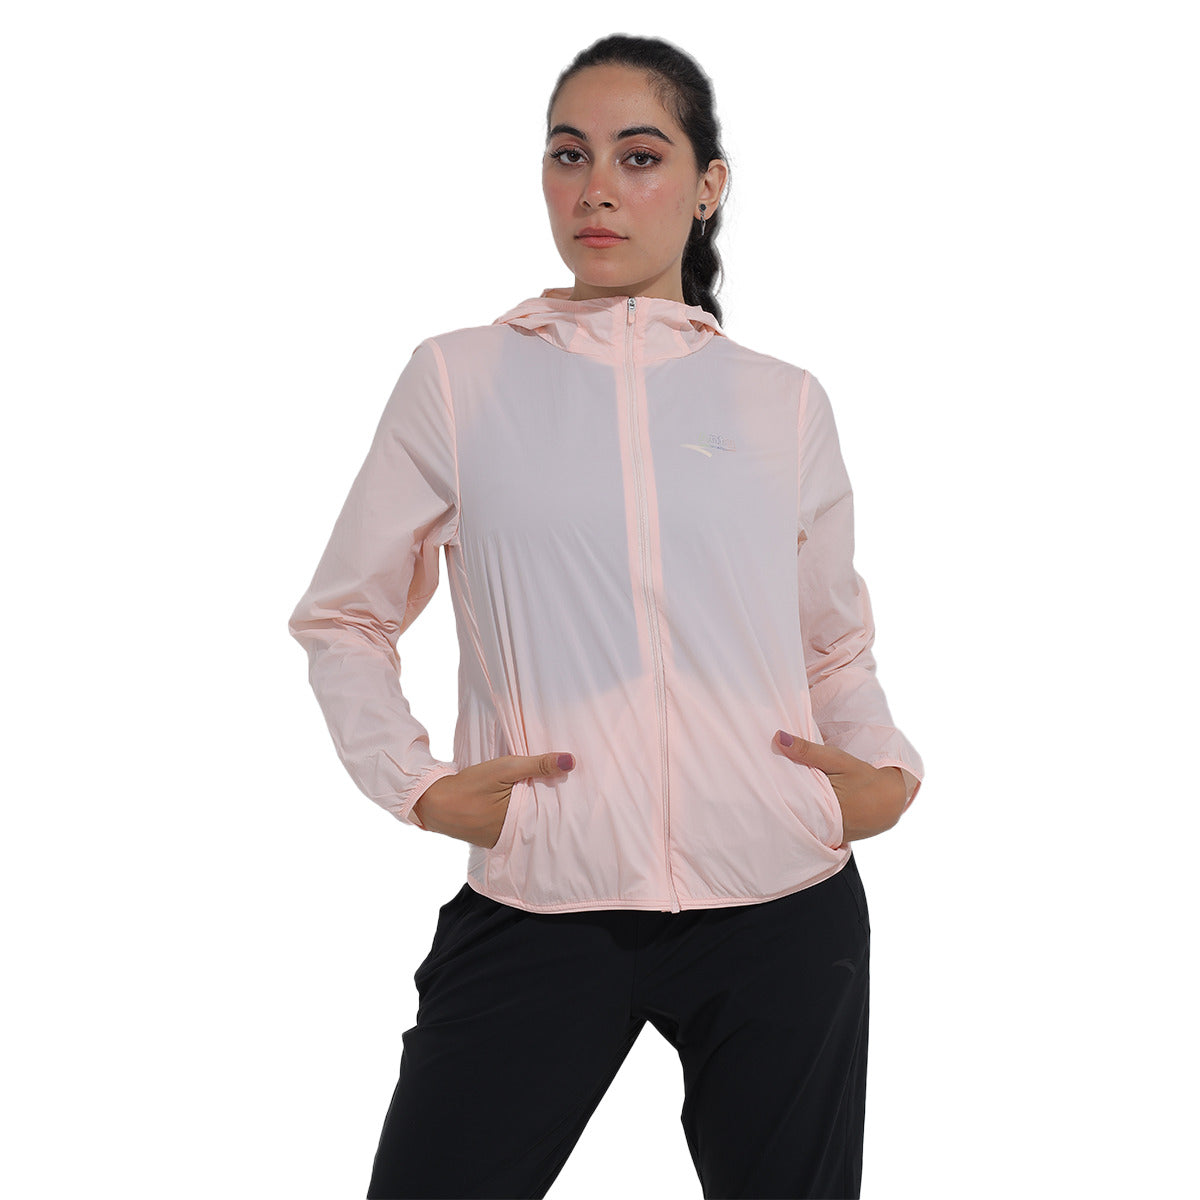 Anta Woven Track Sweatshirt with Hoodies For Women, Rose